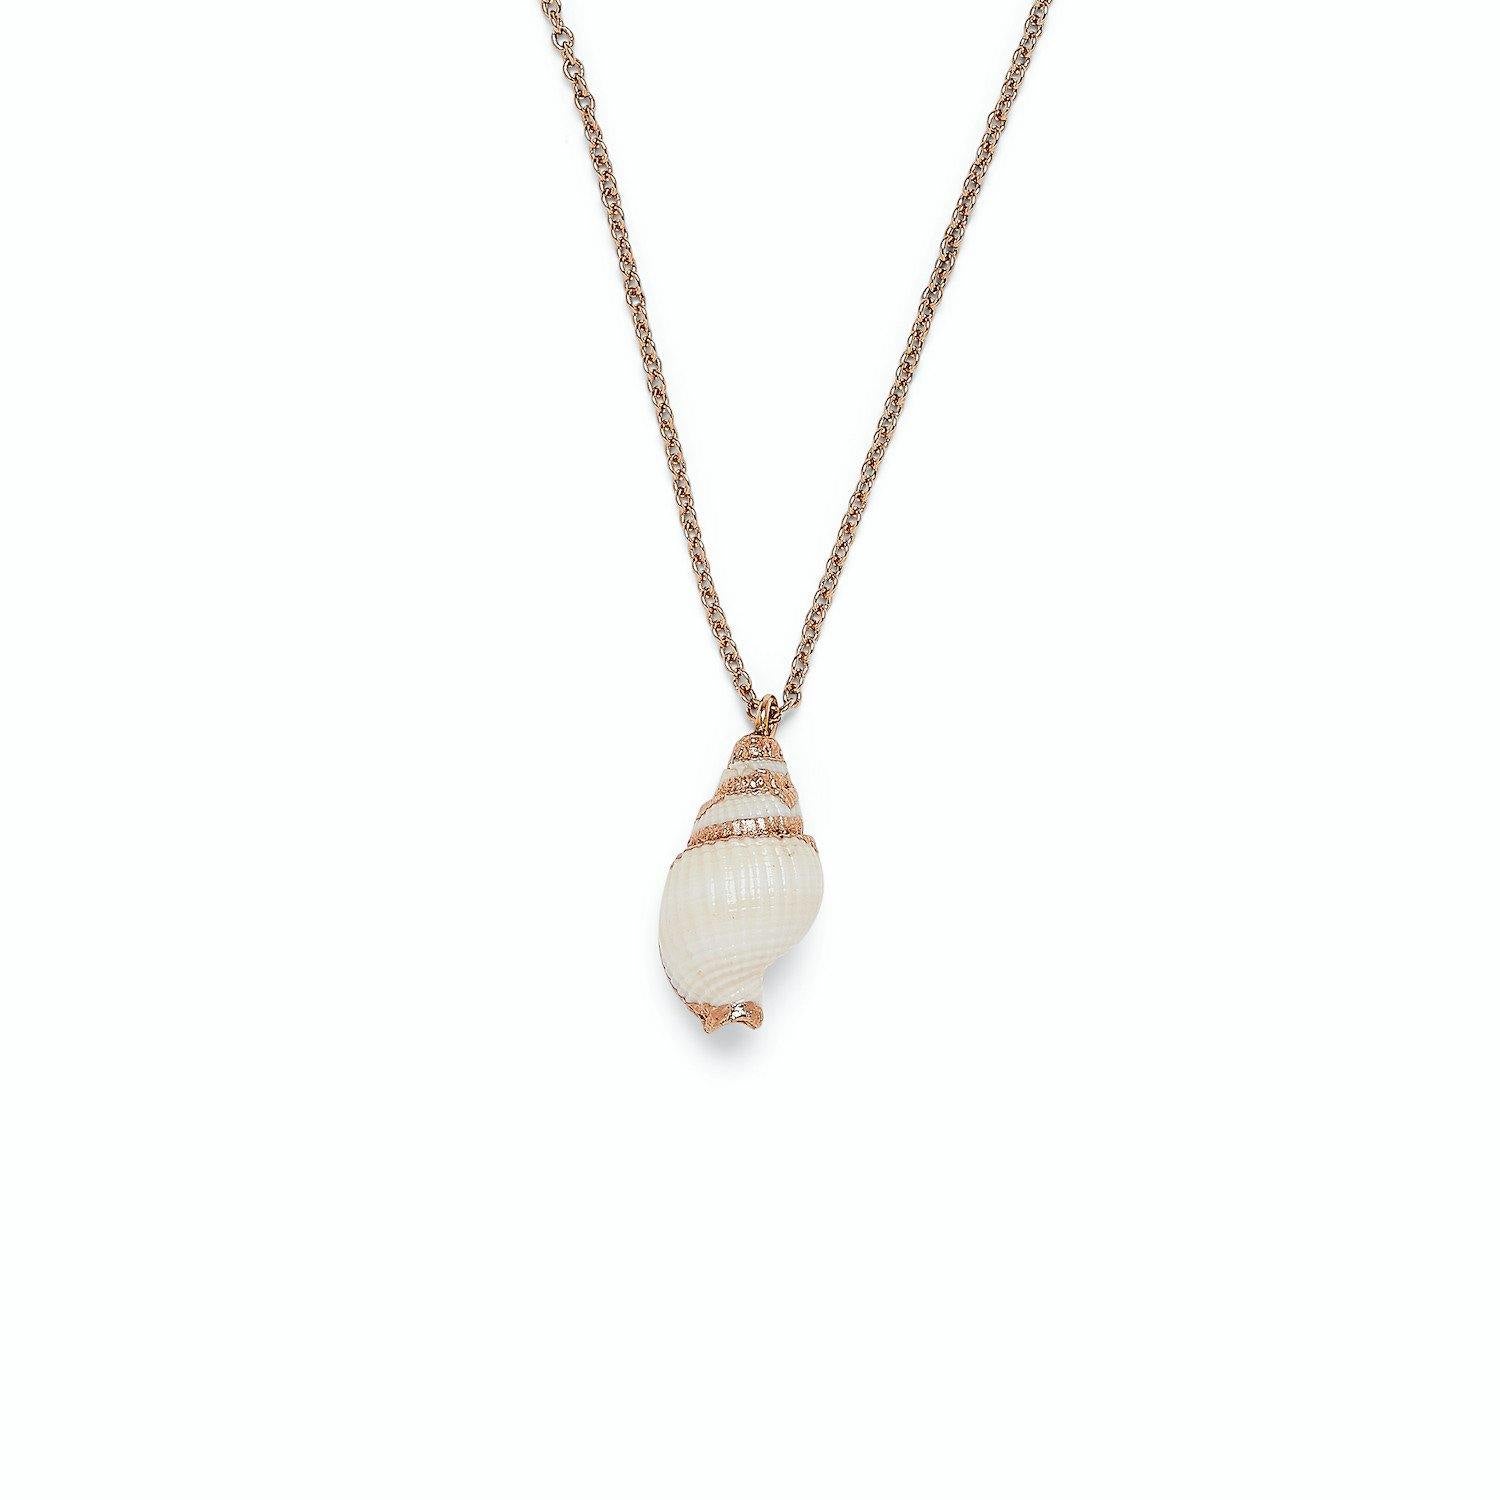 Puravida Necklace Collection 2 - The Salty Mare